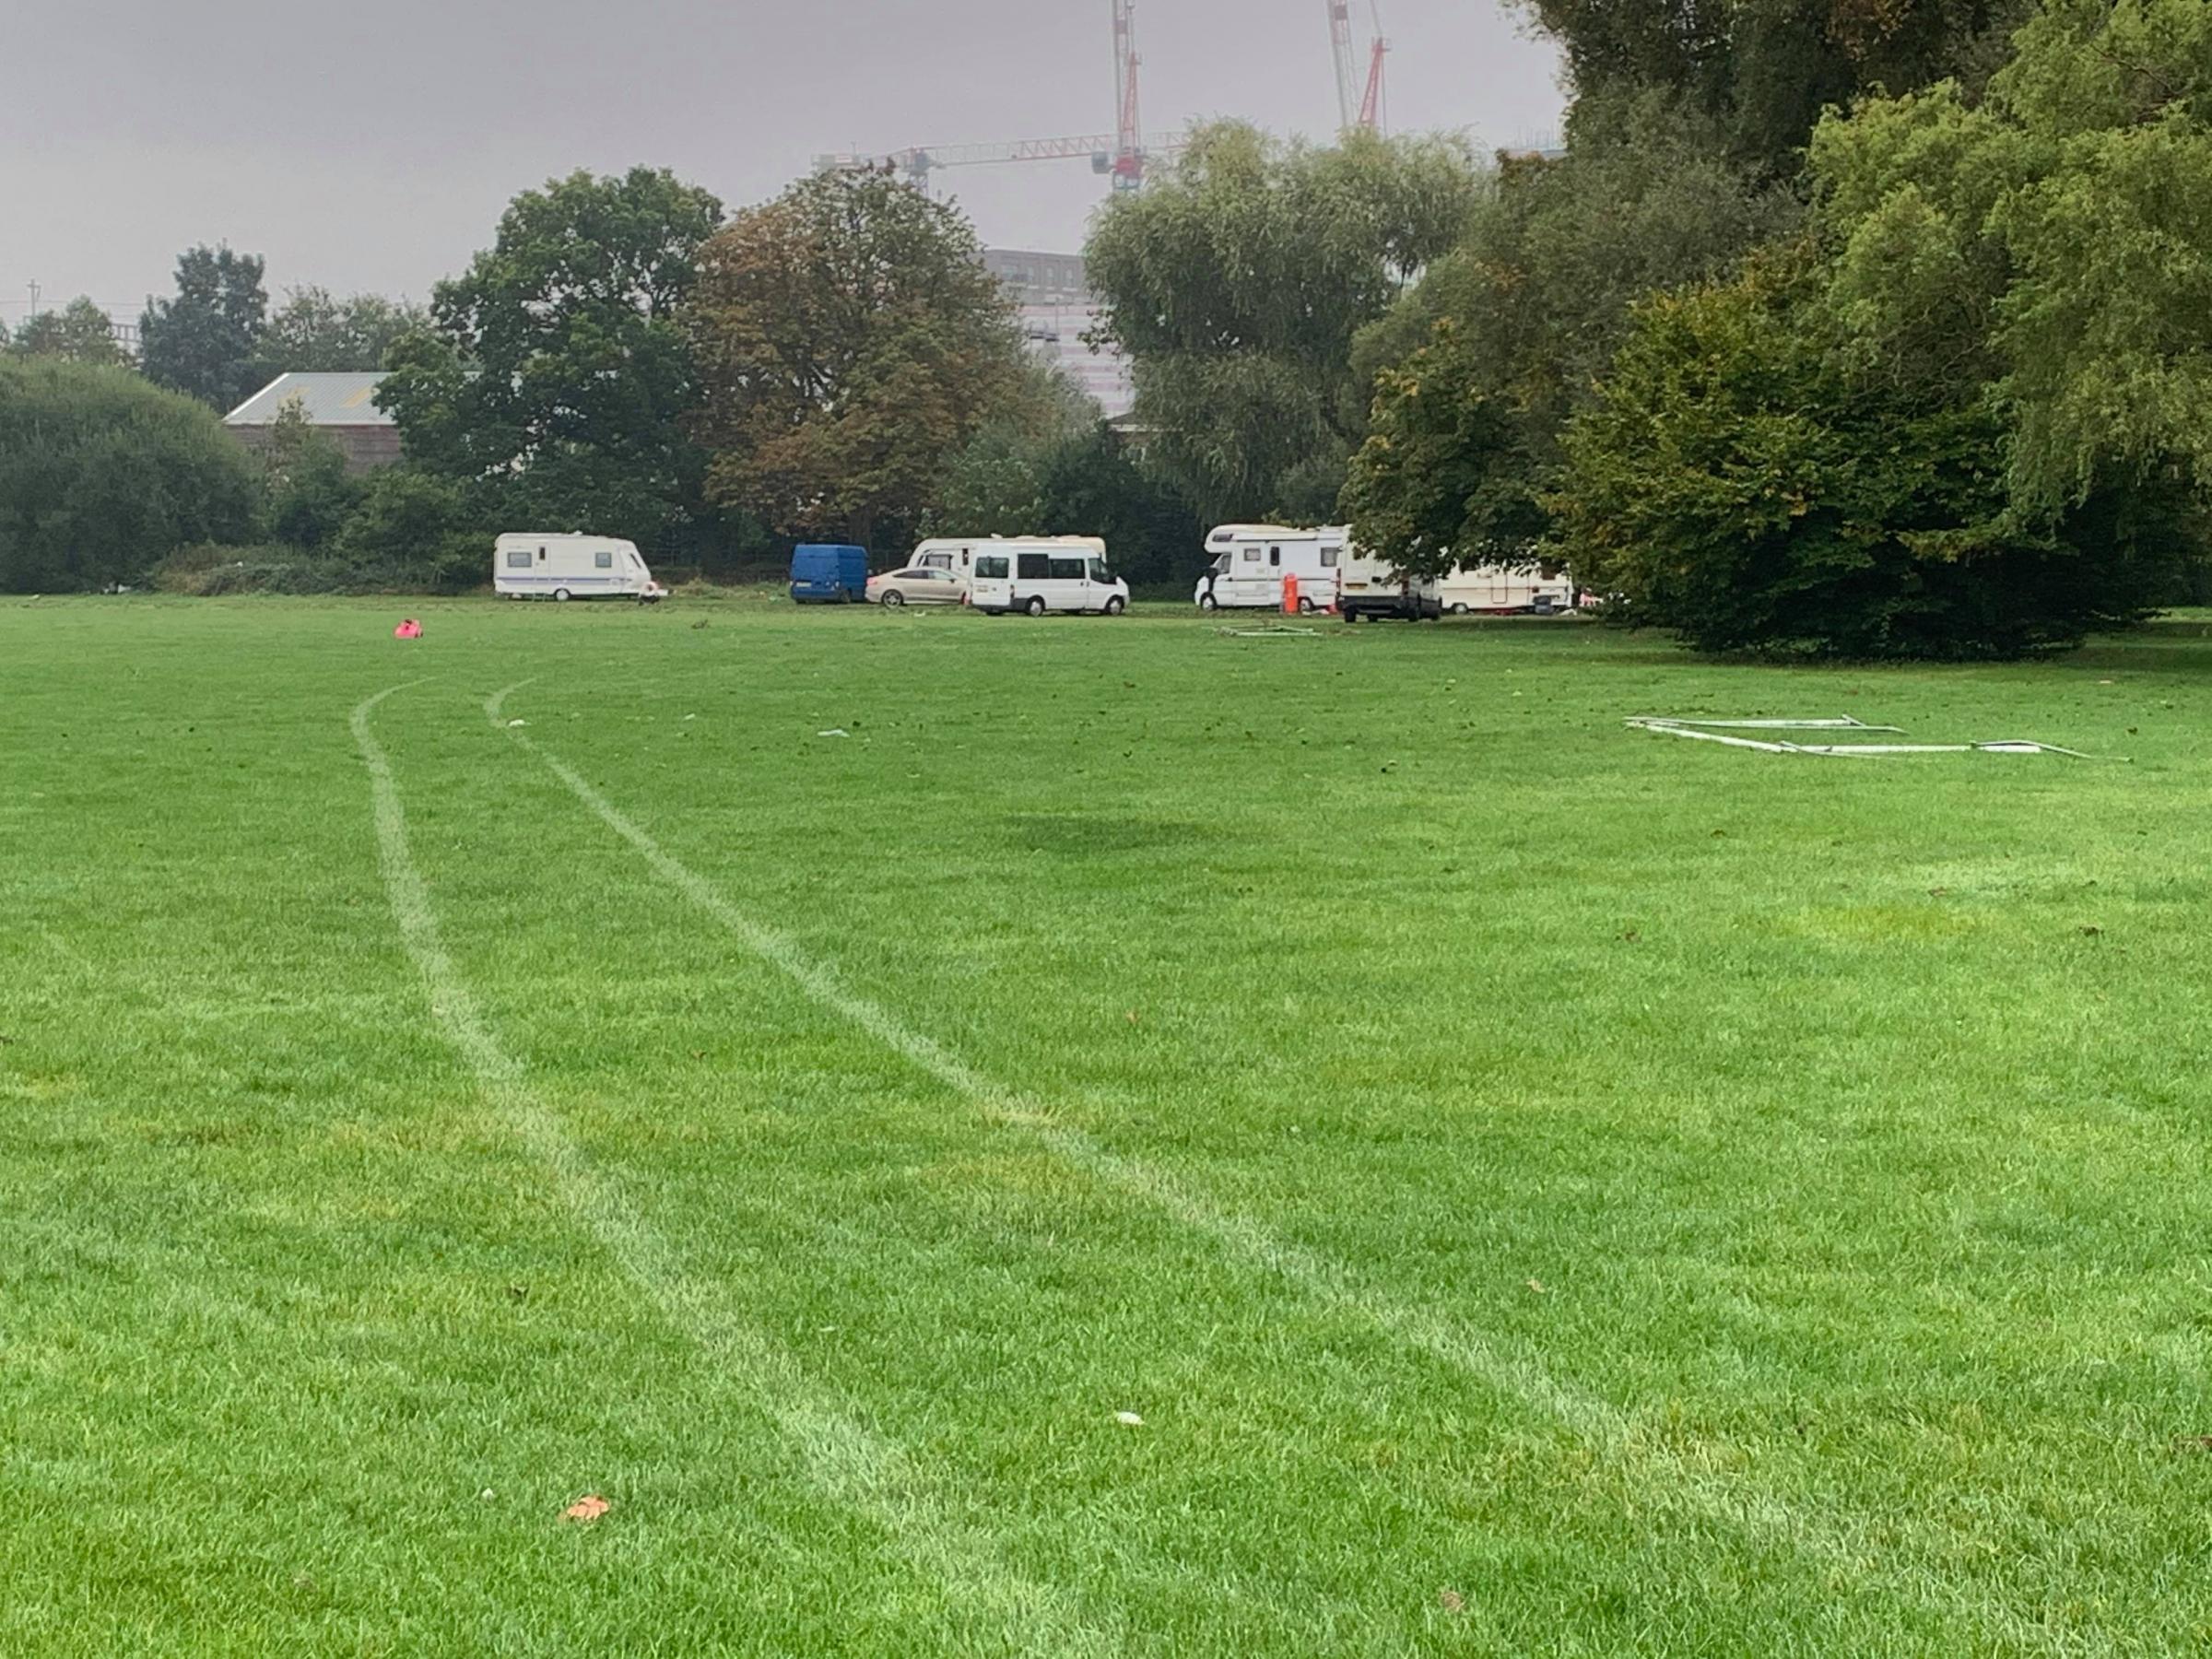 Travellers are still set up at Kings Meadow